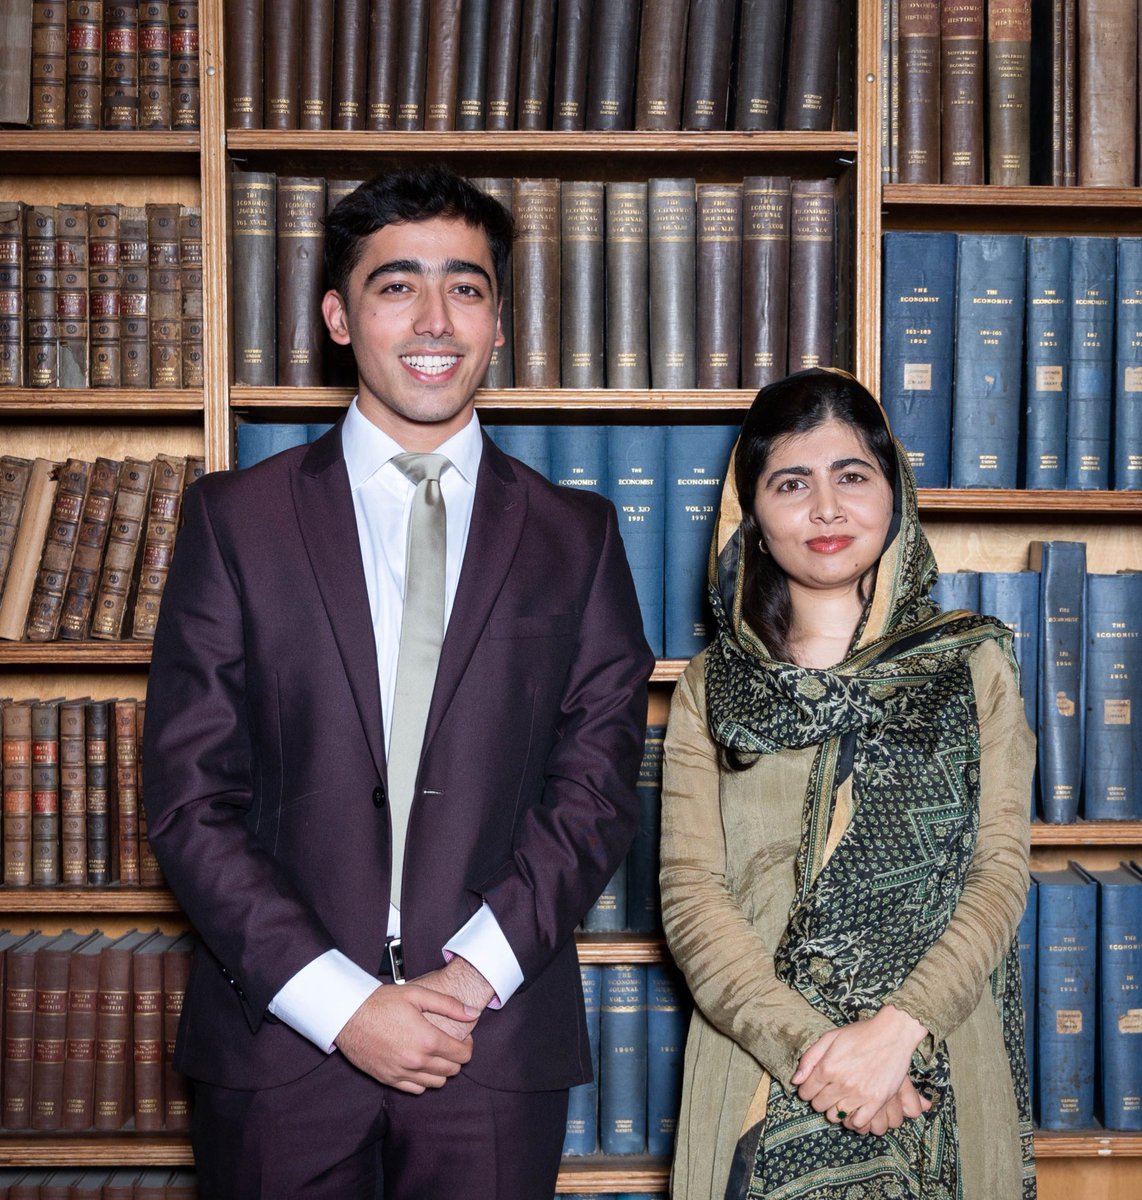 A surreal experience hosting @Malala at the Oxford Union! A very inspiring conversation on her journey & her fight for women’s rights. We discussed the plight of young people in Afghanistan & the human rights violations in Iran. A time for young people to take a more active role!